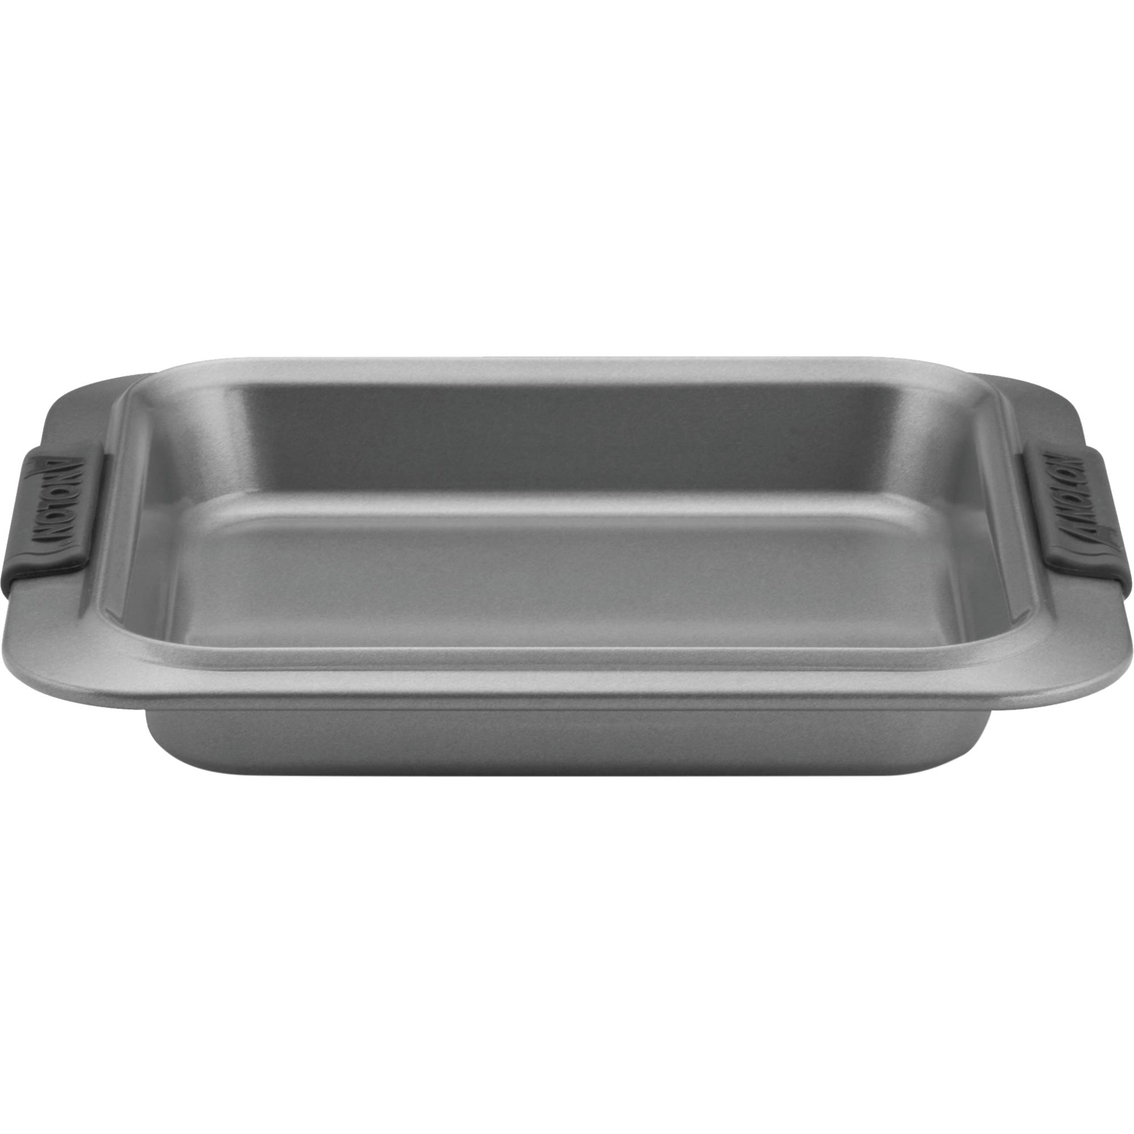 Anolon Advanced Nonstick Bakeware 9 in. Square Silicone Grips Cake Pan - Image 2 of 4